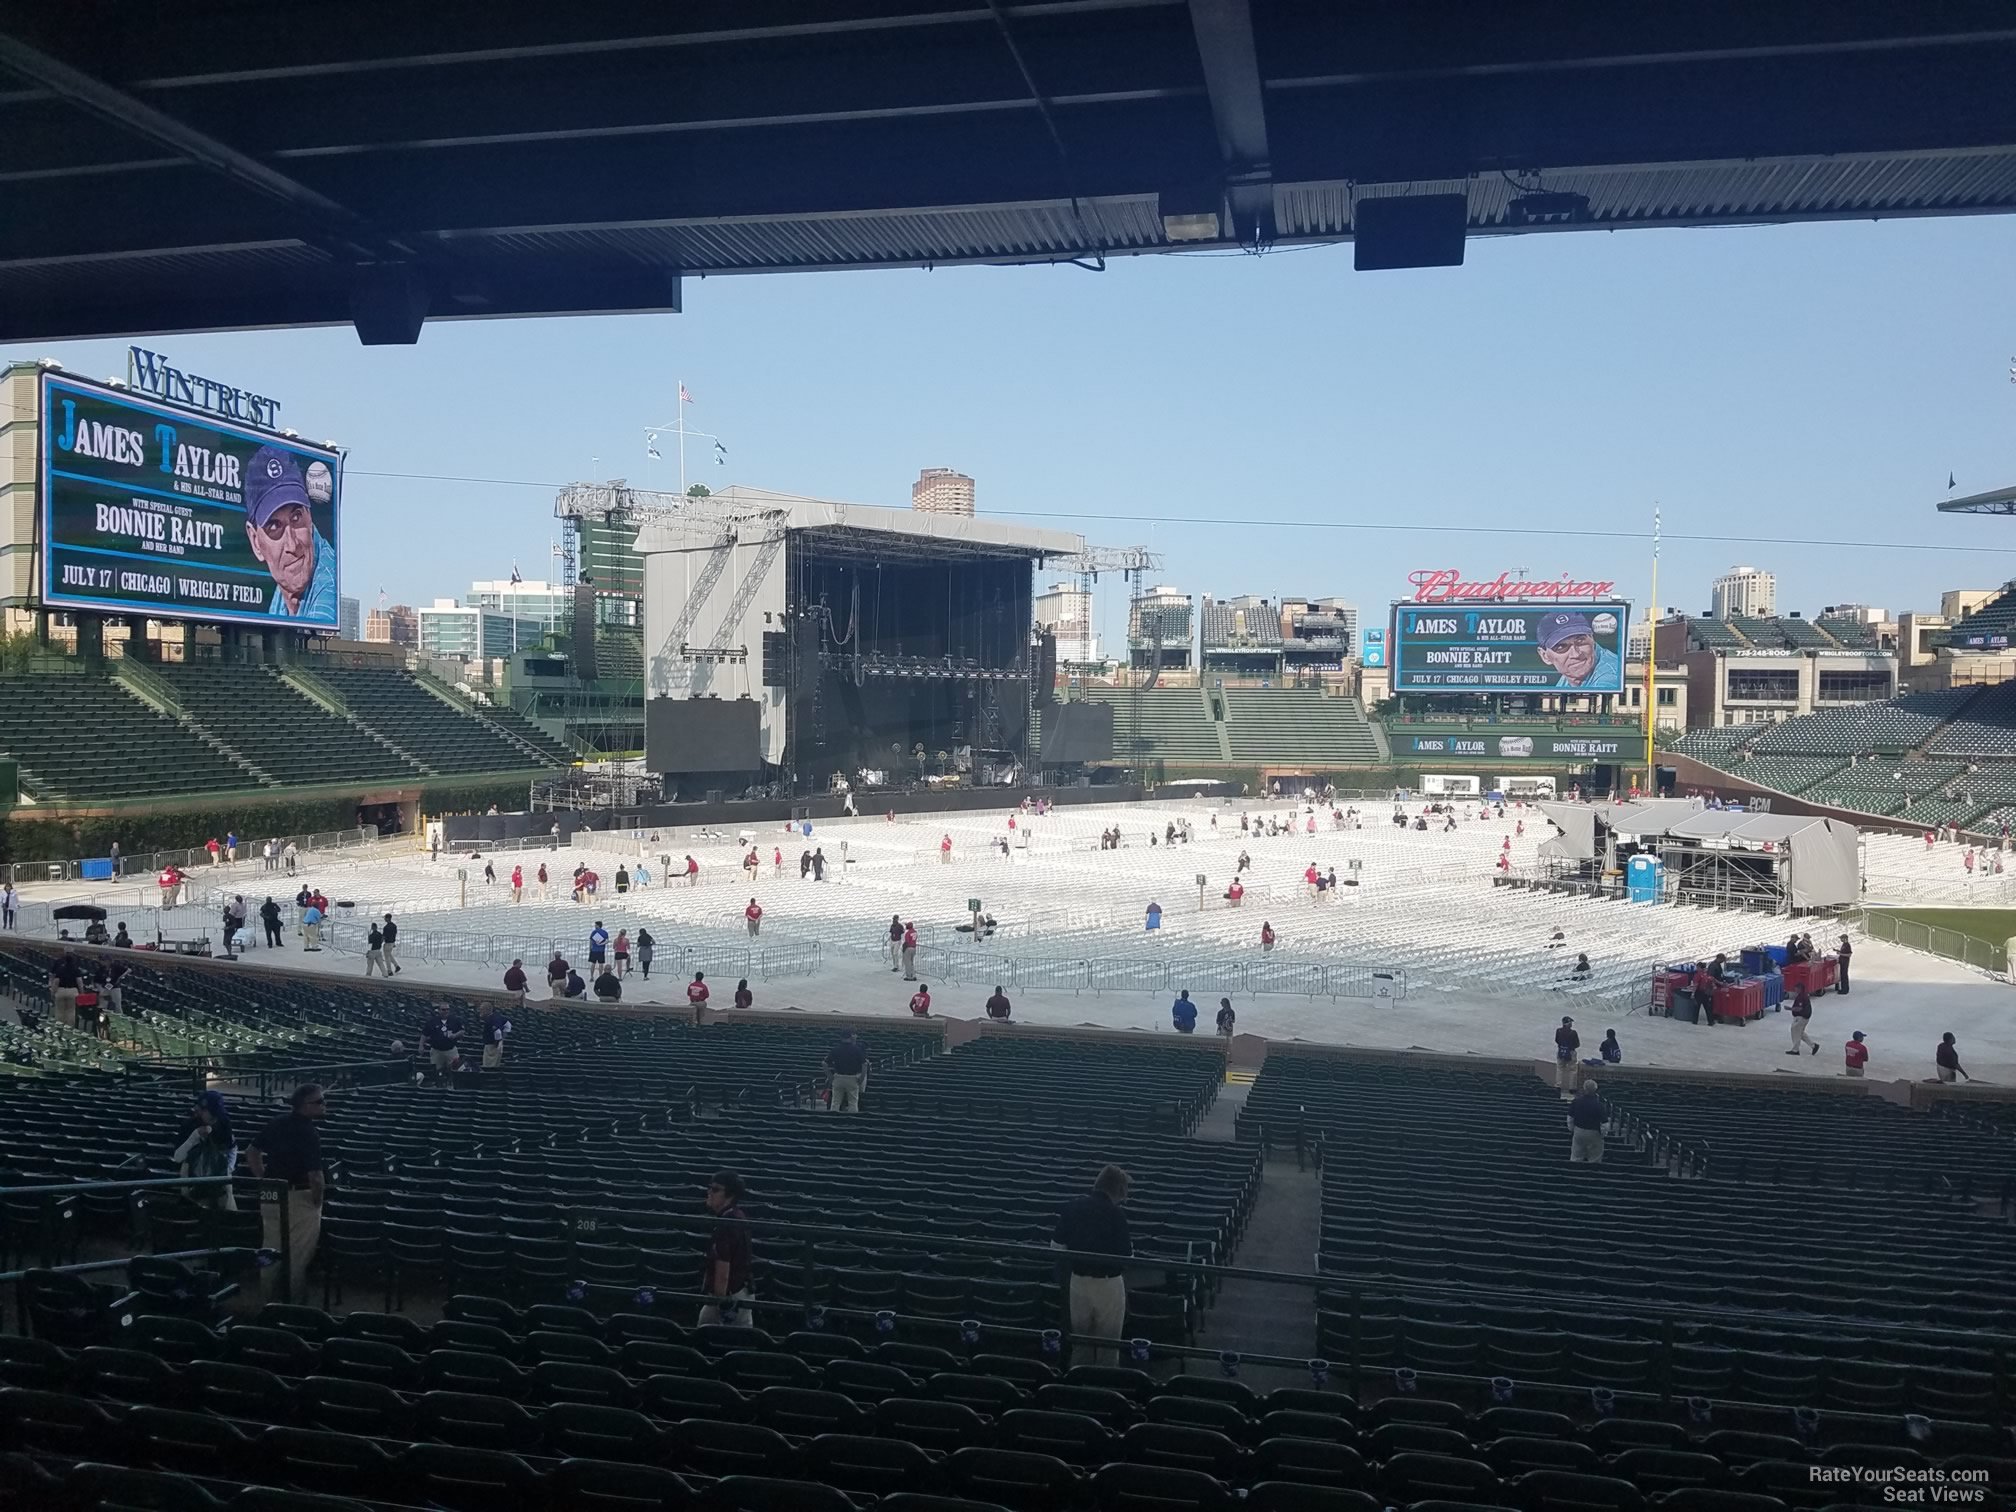 section 207, row 11 seat view  for concert - wrigley field